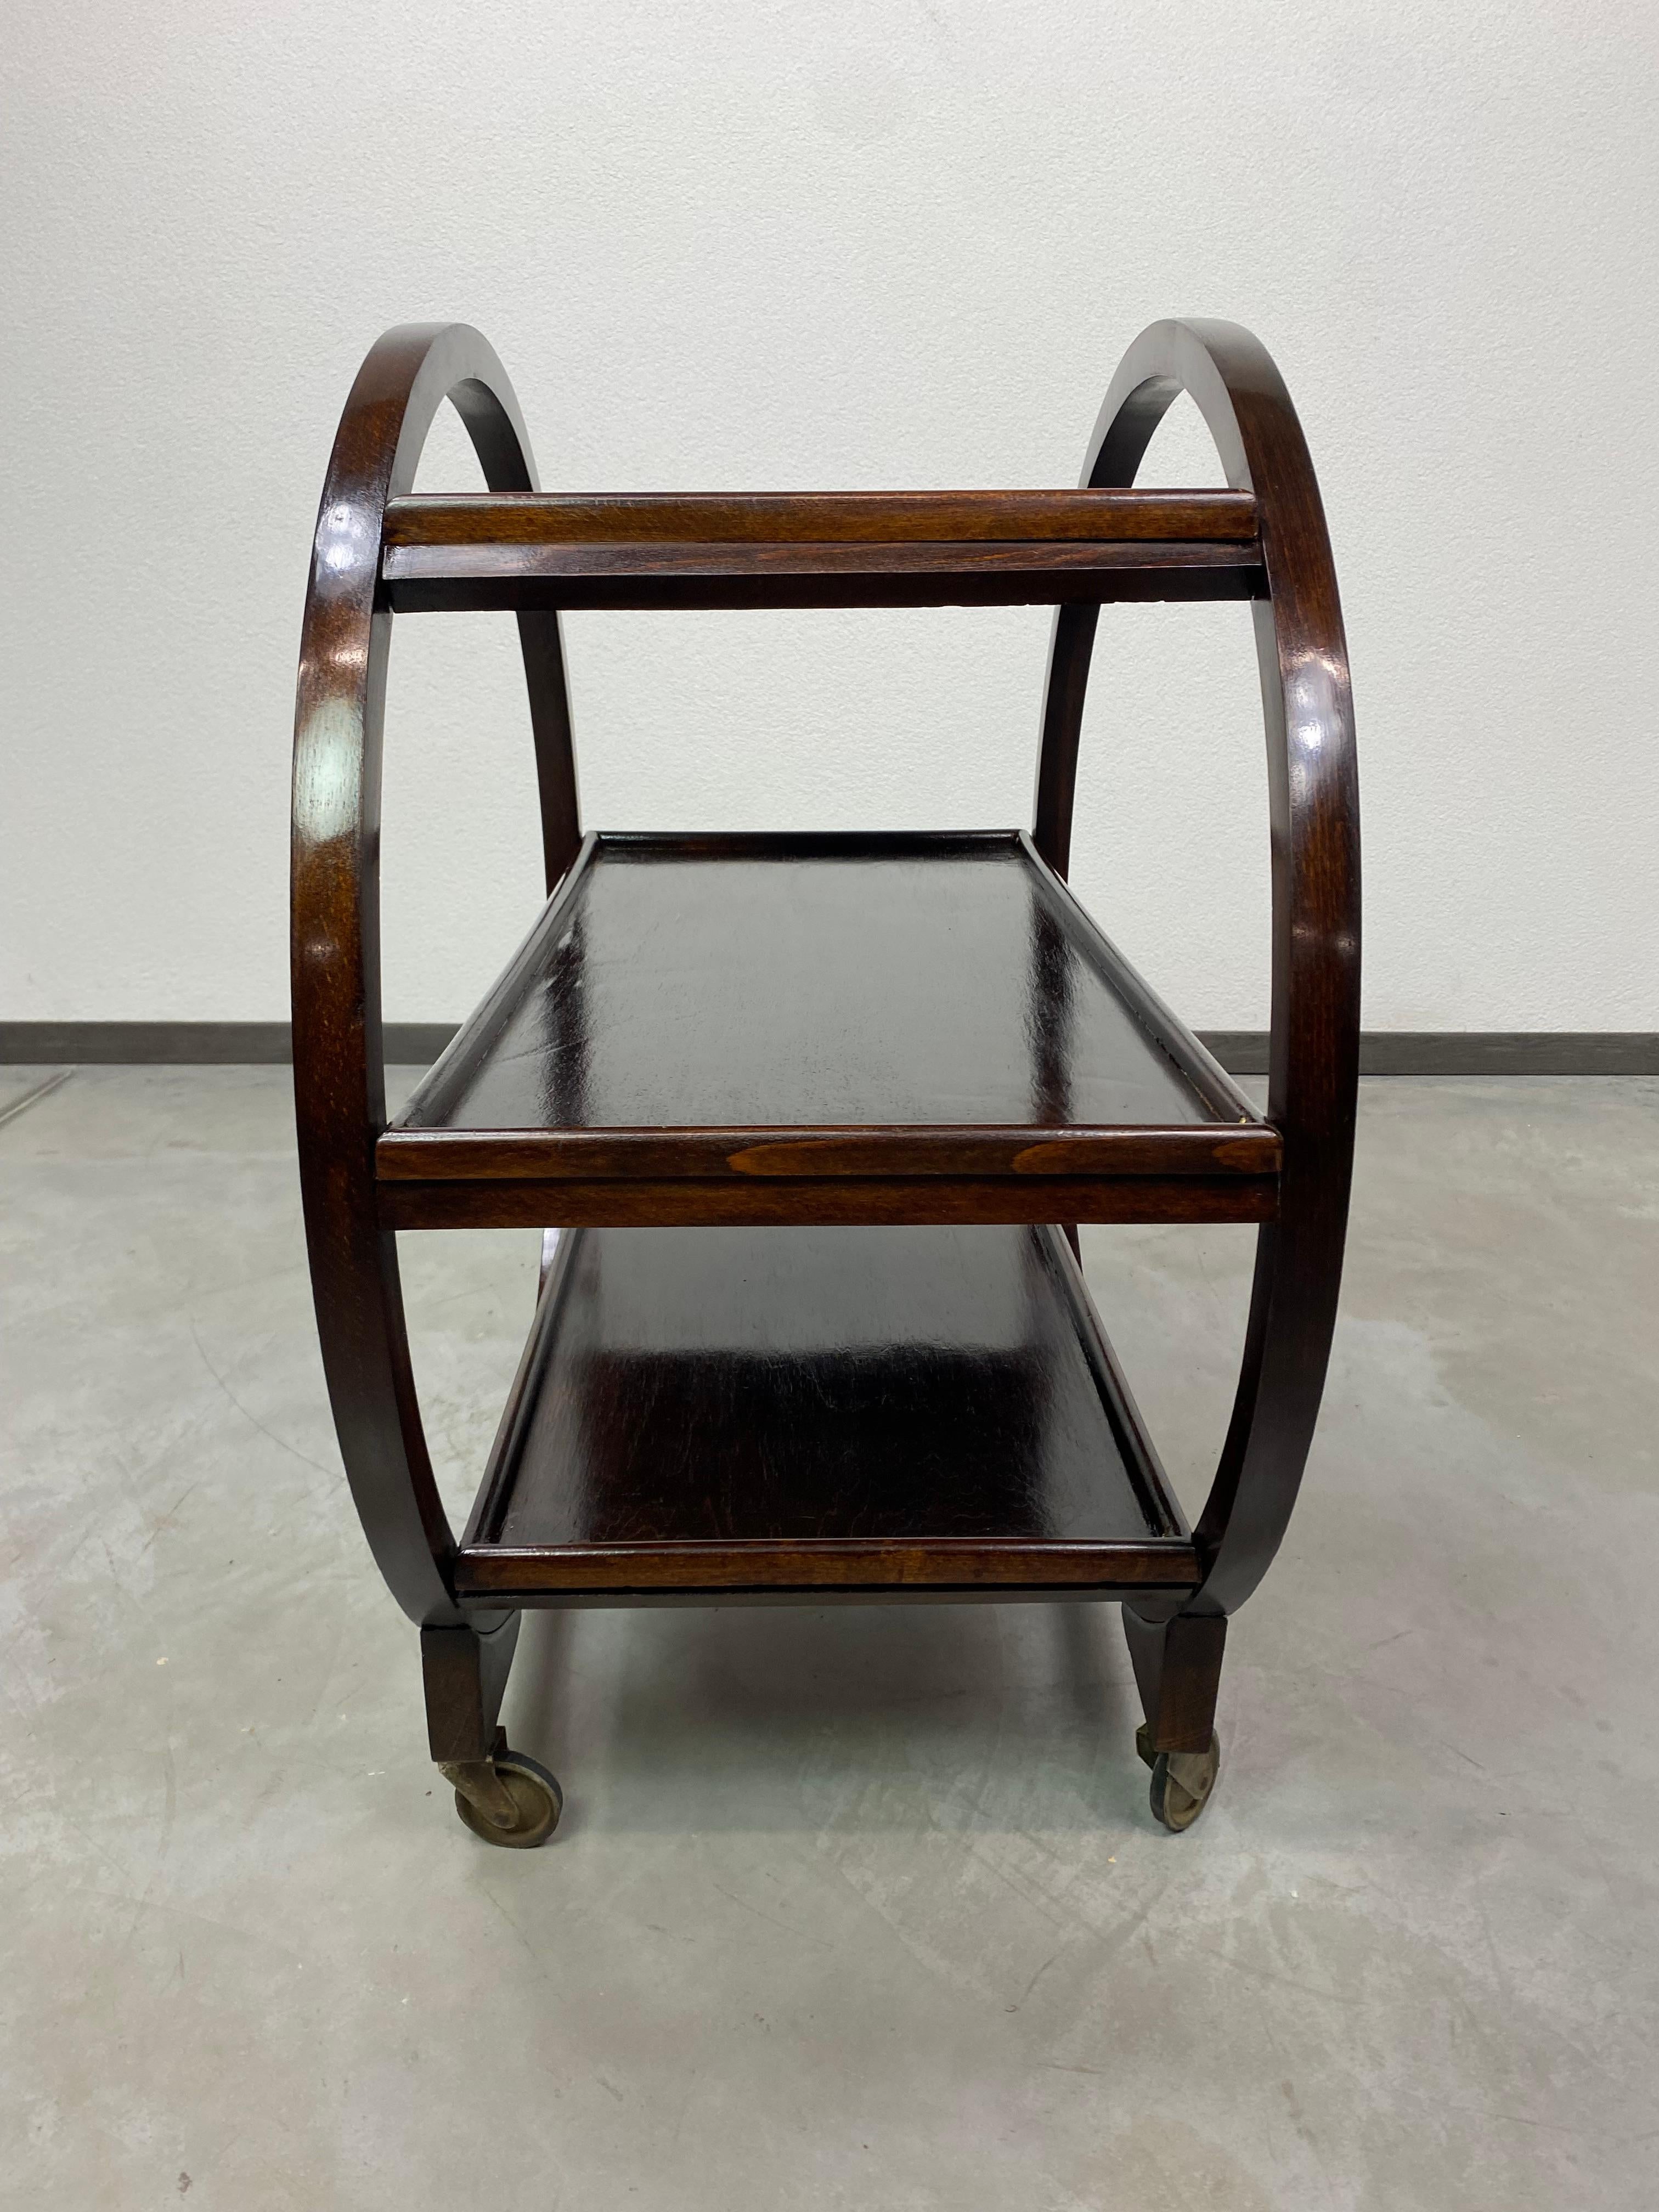 Art deco serving trolley by Thonet Mundus 1930s For Sale 2